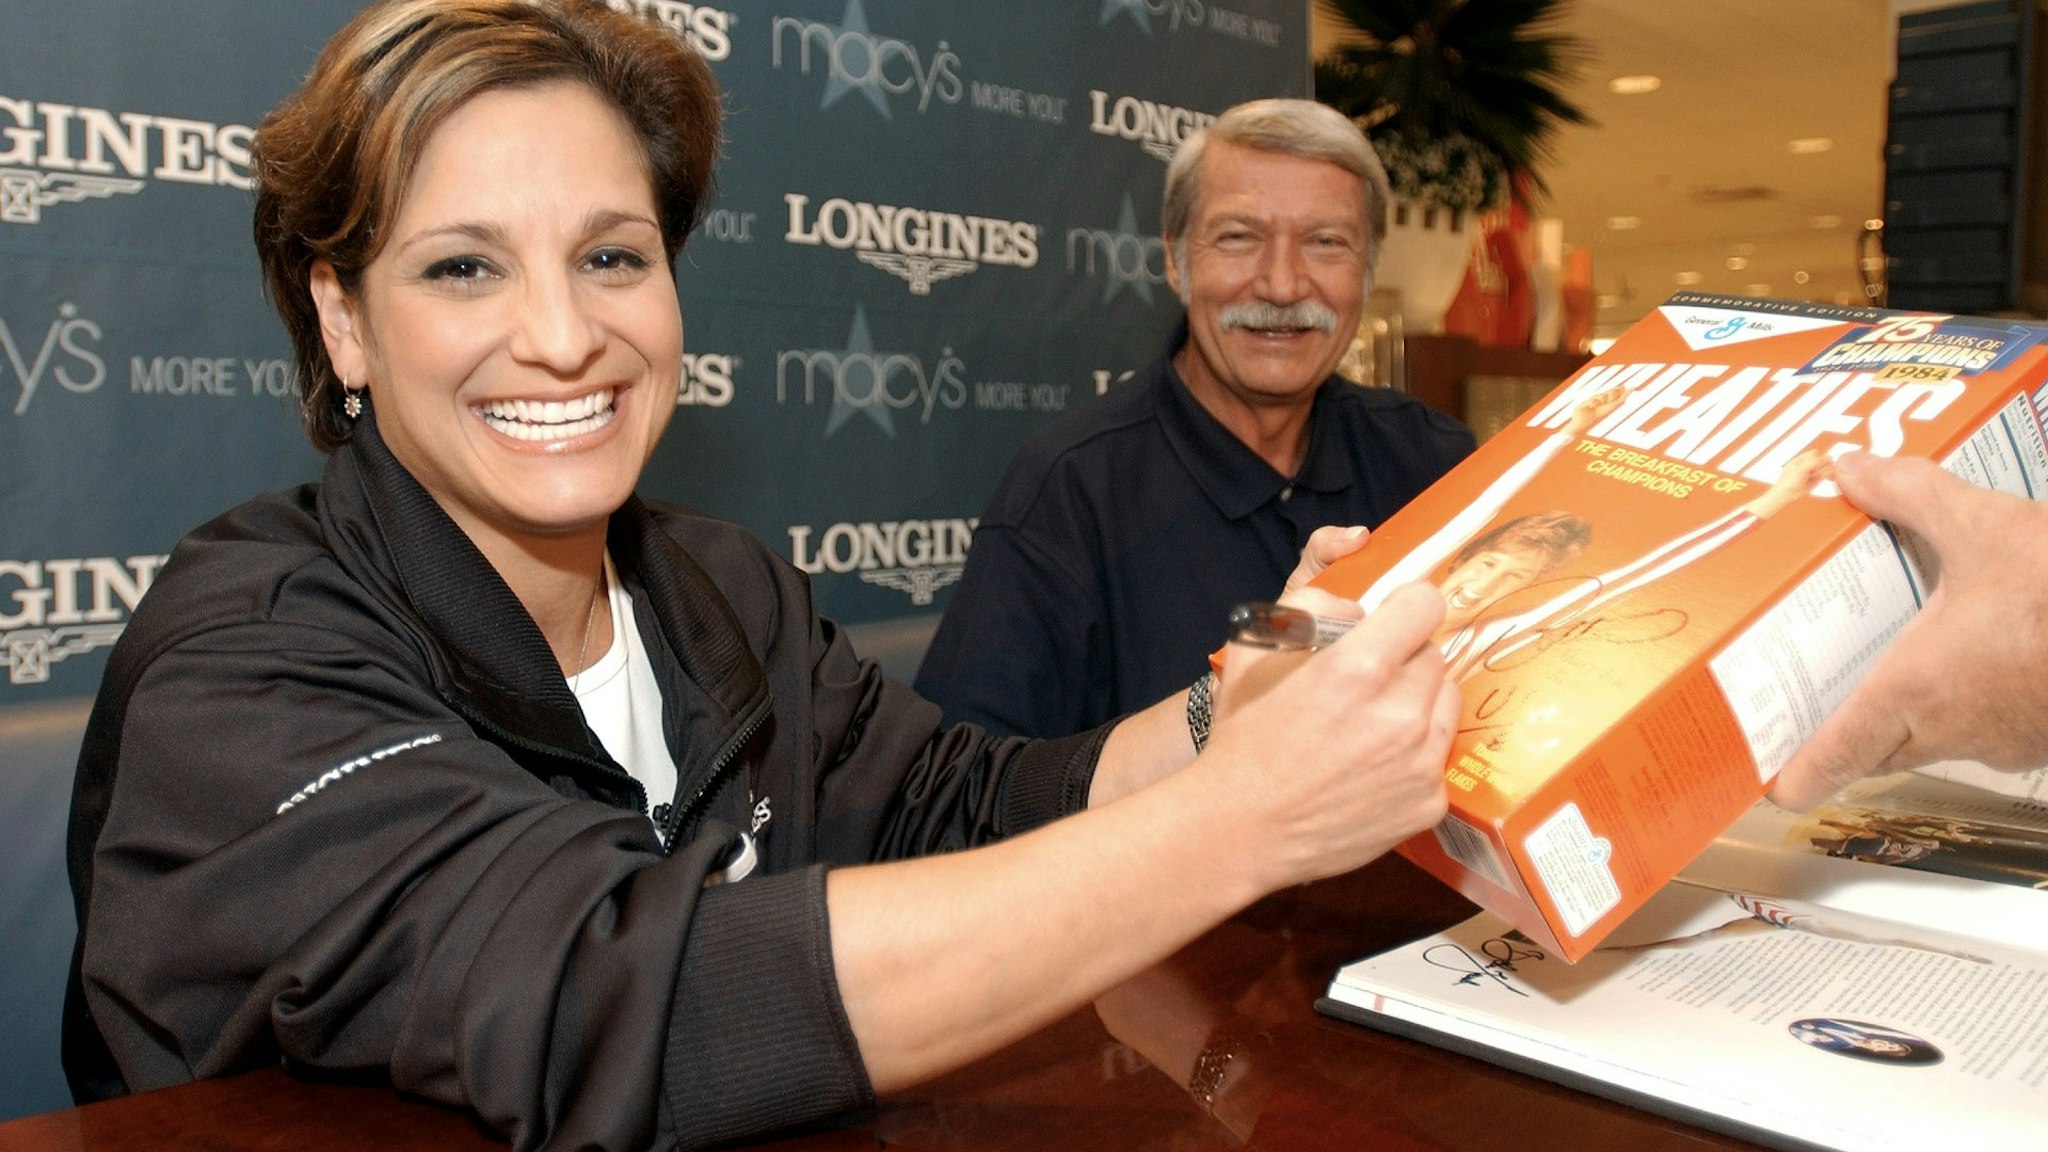 Olympian Mary Lou Retton (left), an official with the "Longines Perfect 10 Moments in Time" joined famed Olympic coach Bela Karolyi signing autographs for fans at Macy's at the South Coast Plaza 7/25/03.